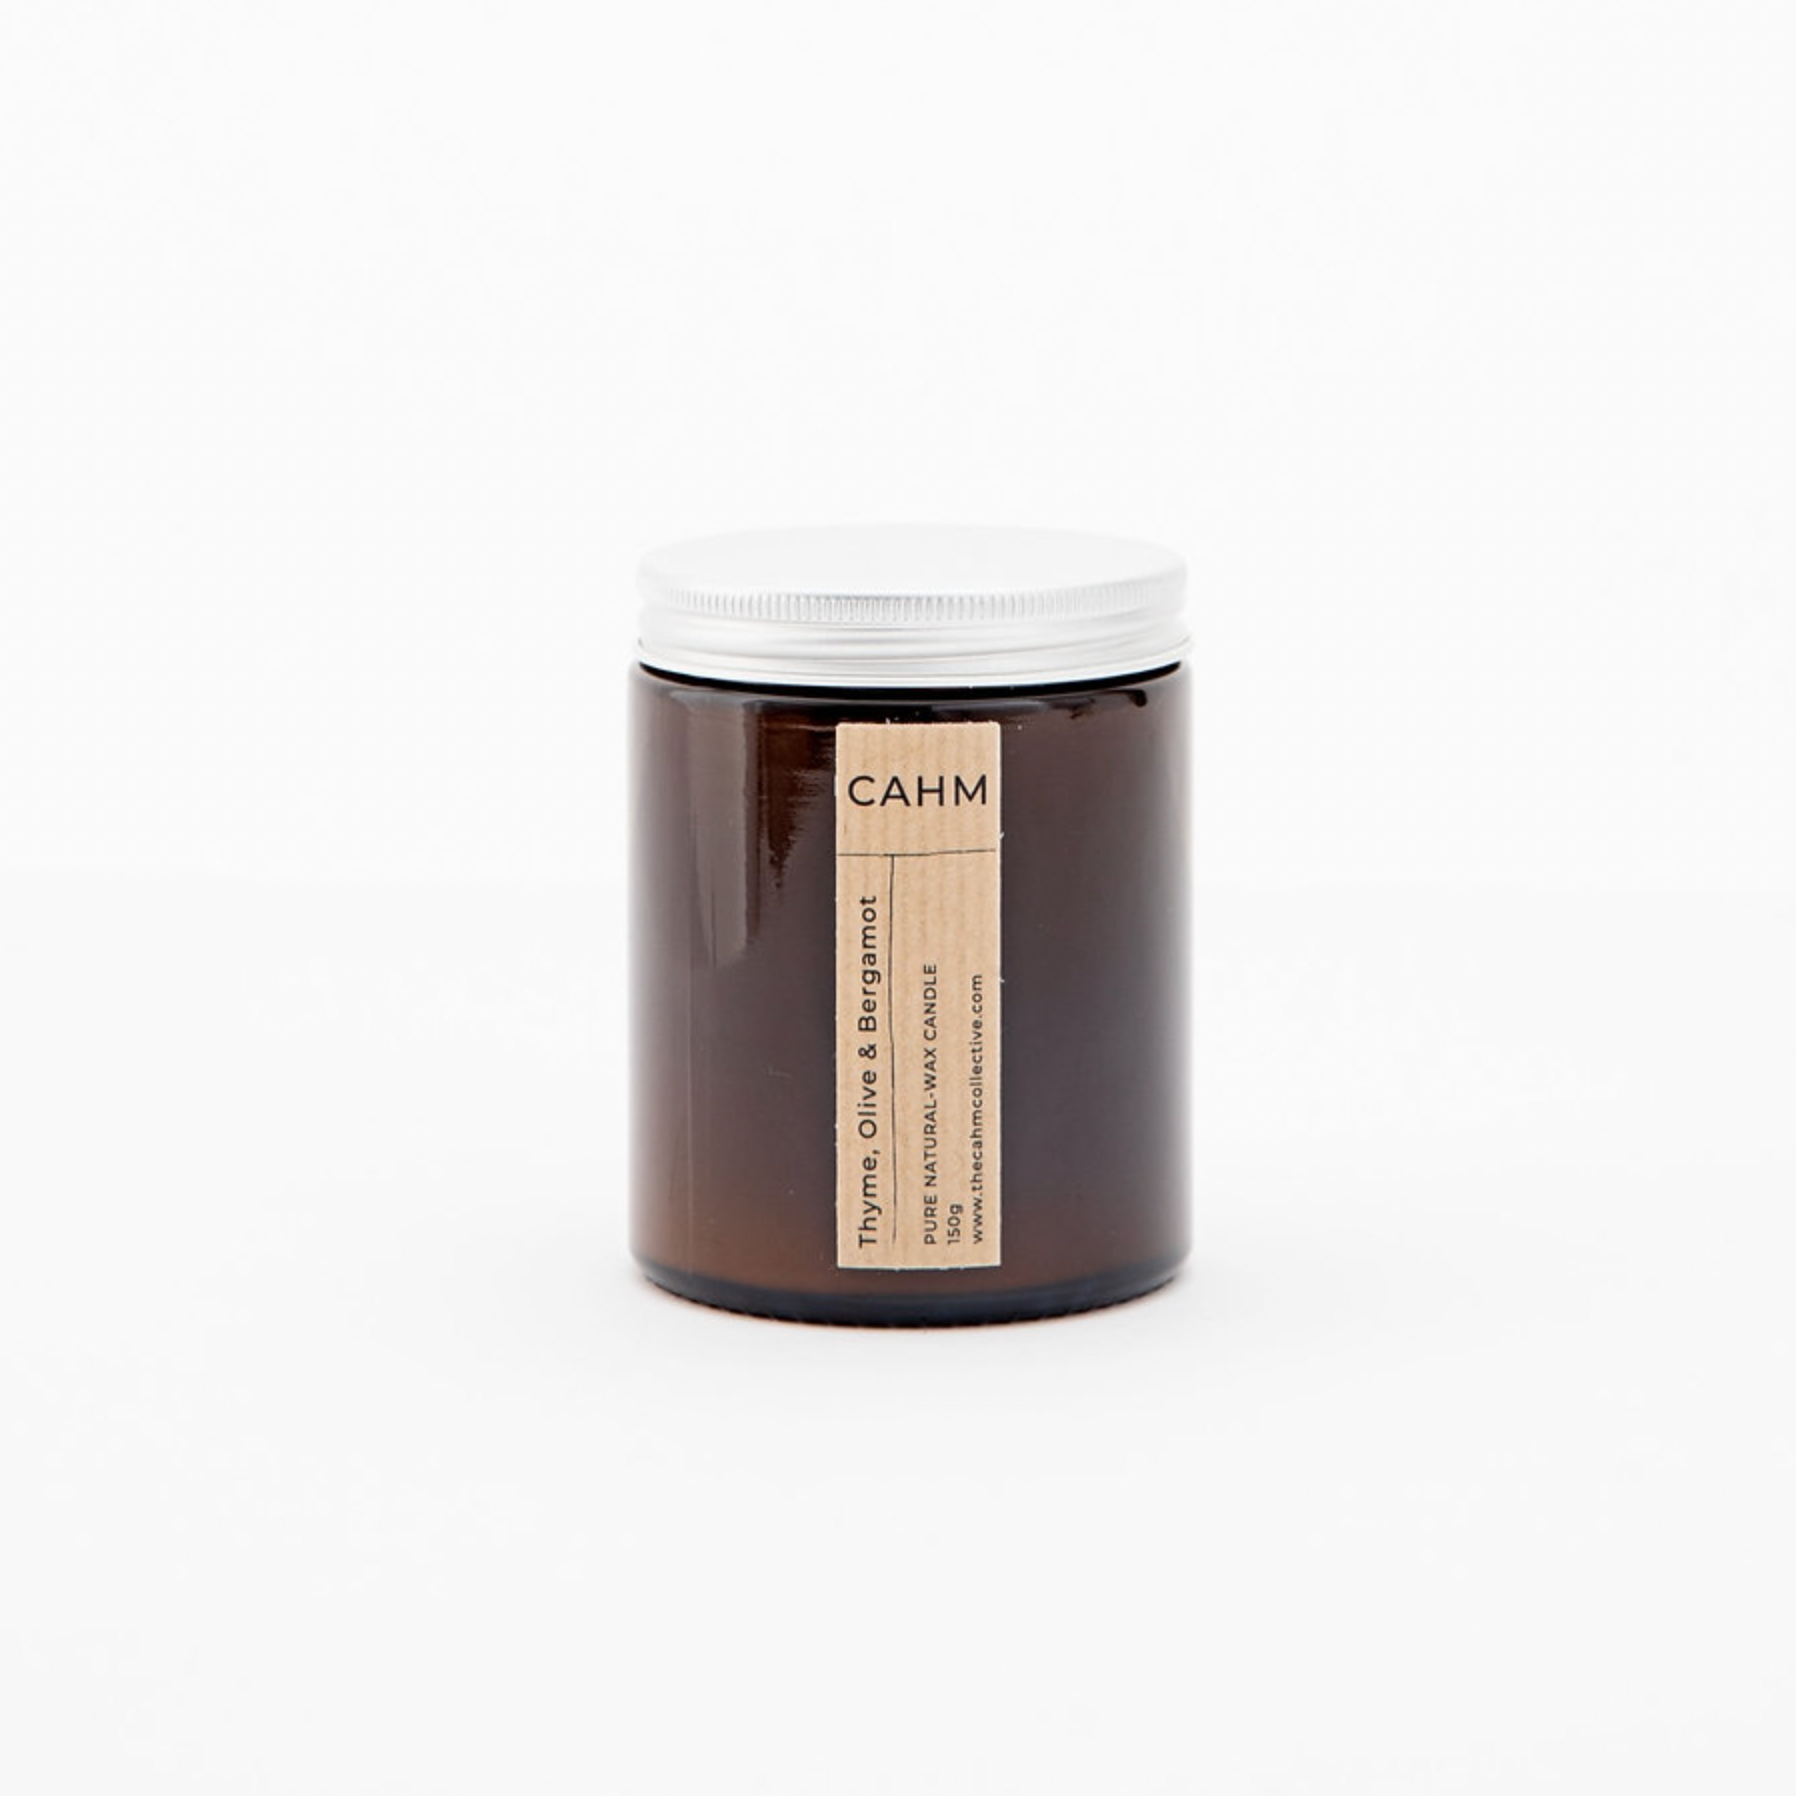 A Thyme, Olive and Bergamot Candle from the Amber Jar Candle collection by The CAHM Collective.